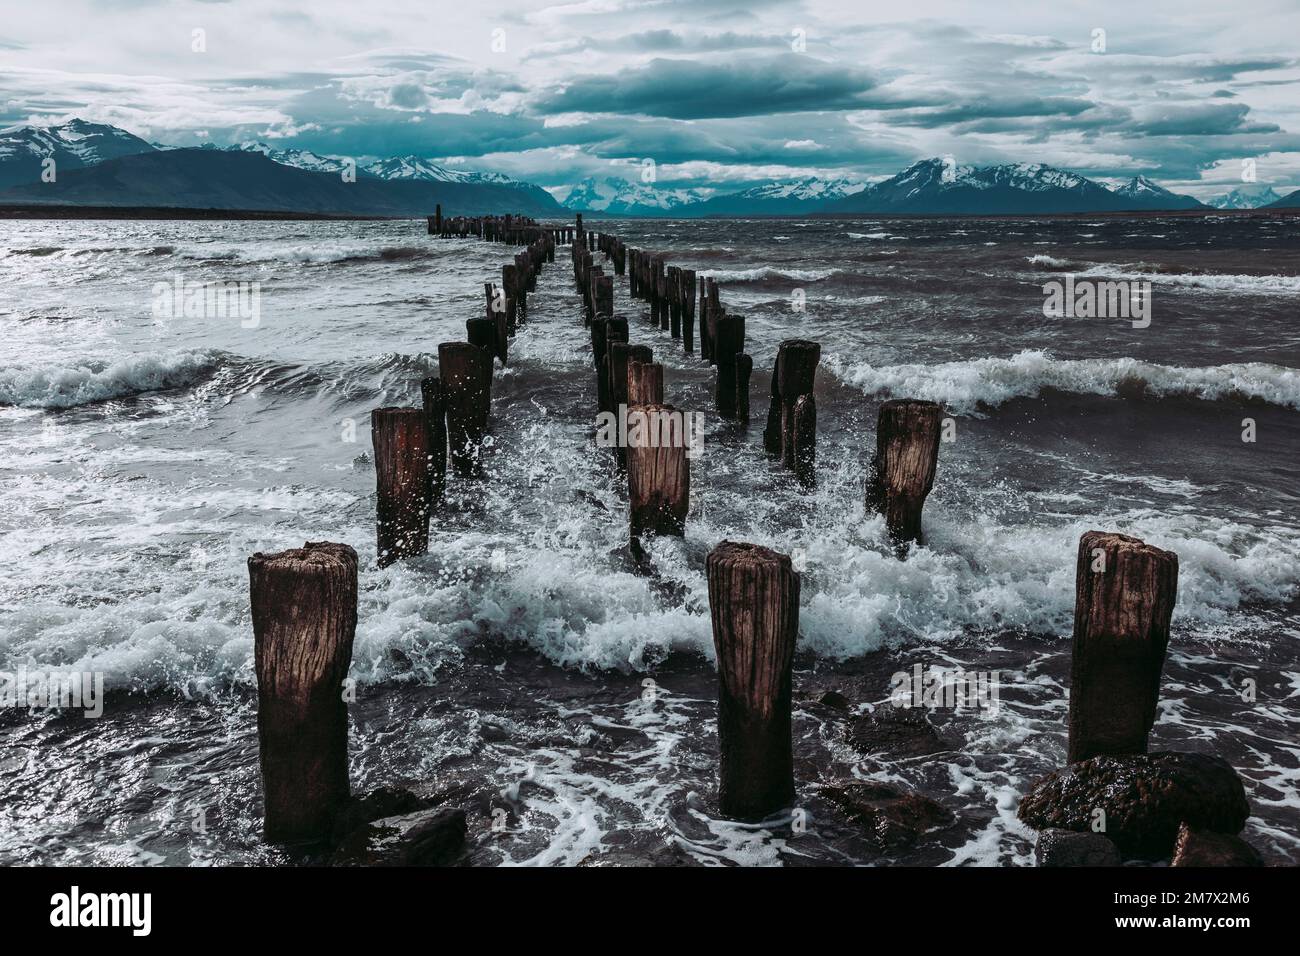 The remains of an old pier, now a resting place for seabirds. Puerto Natales, Chilean Patagonia. Stock Photo